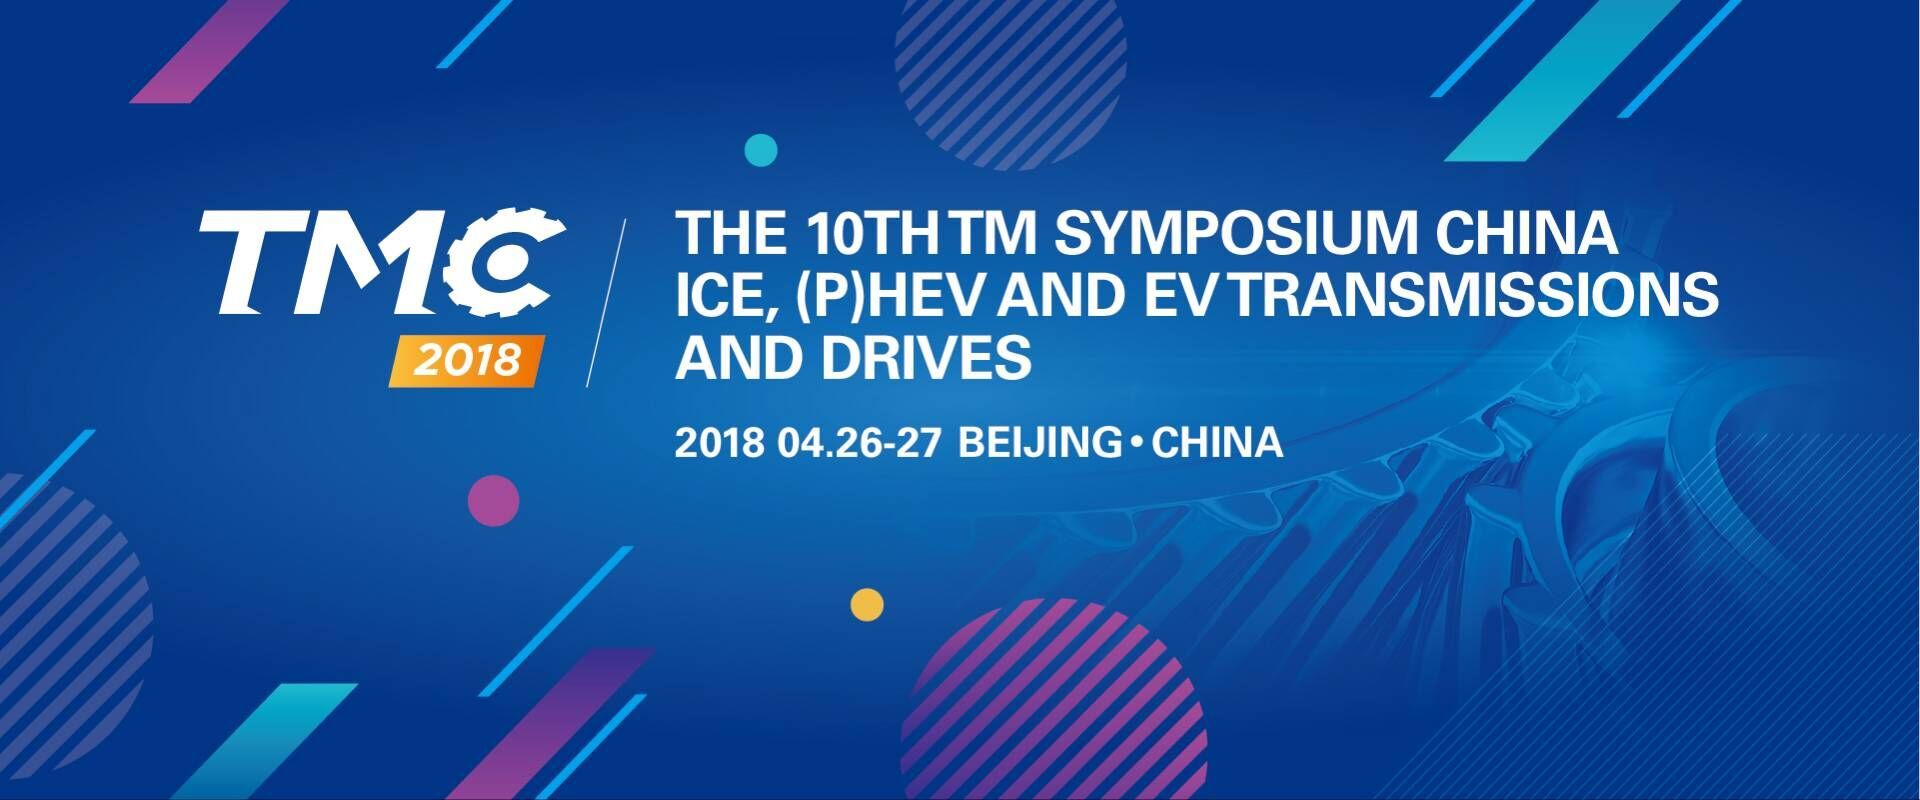 The 10th TM Symposium China ICE, (P)HEV and EV Transmissions and Drives